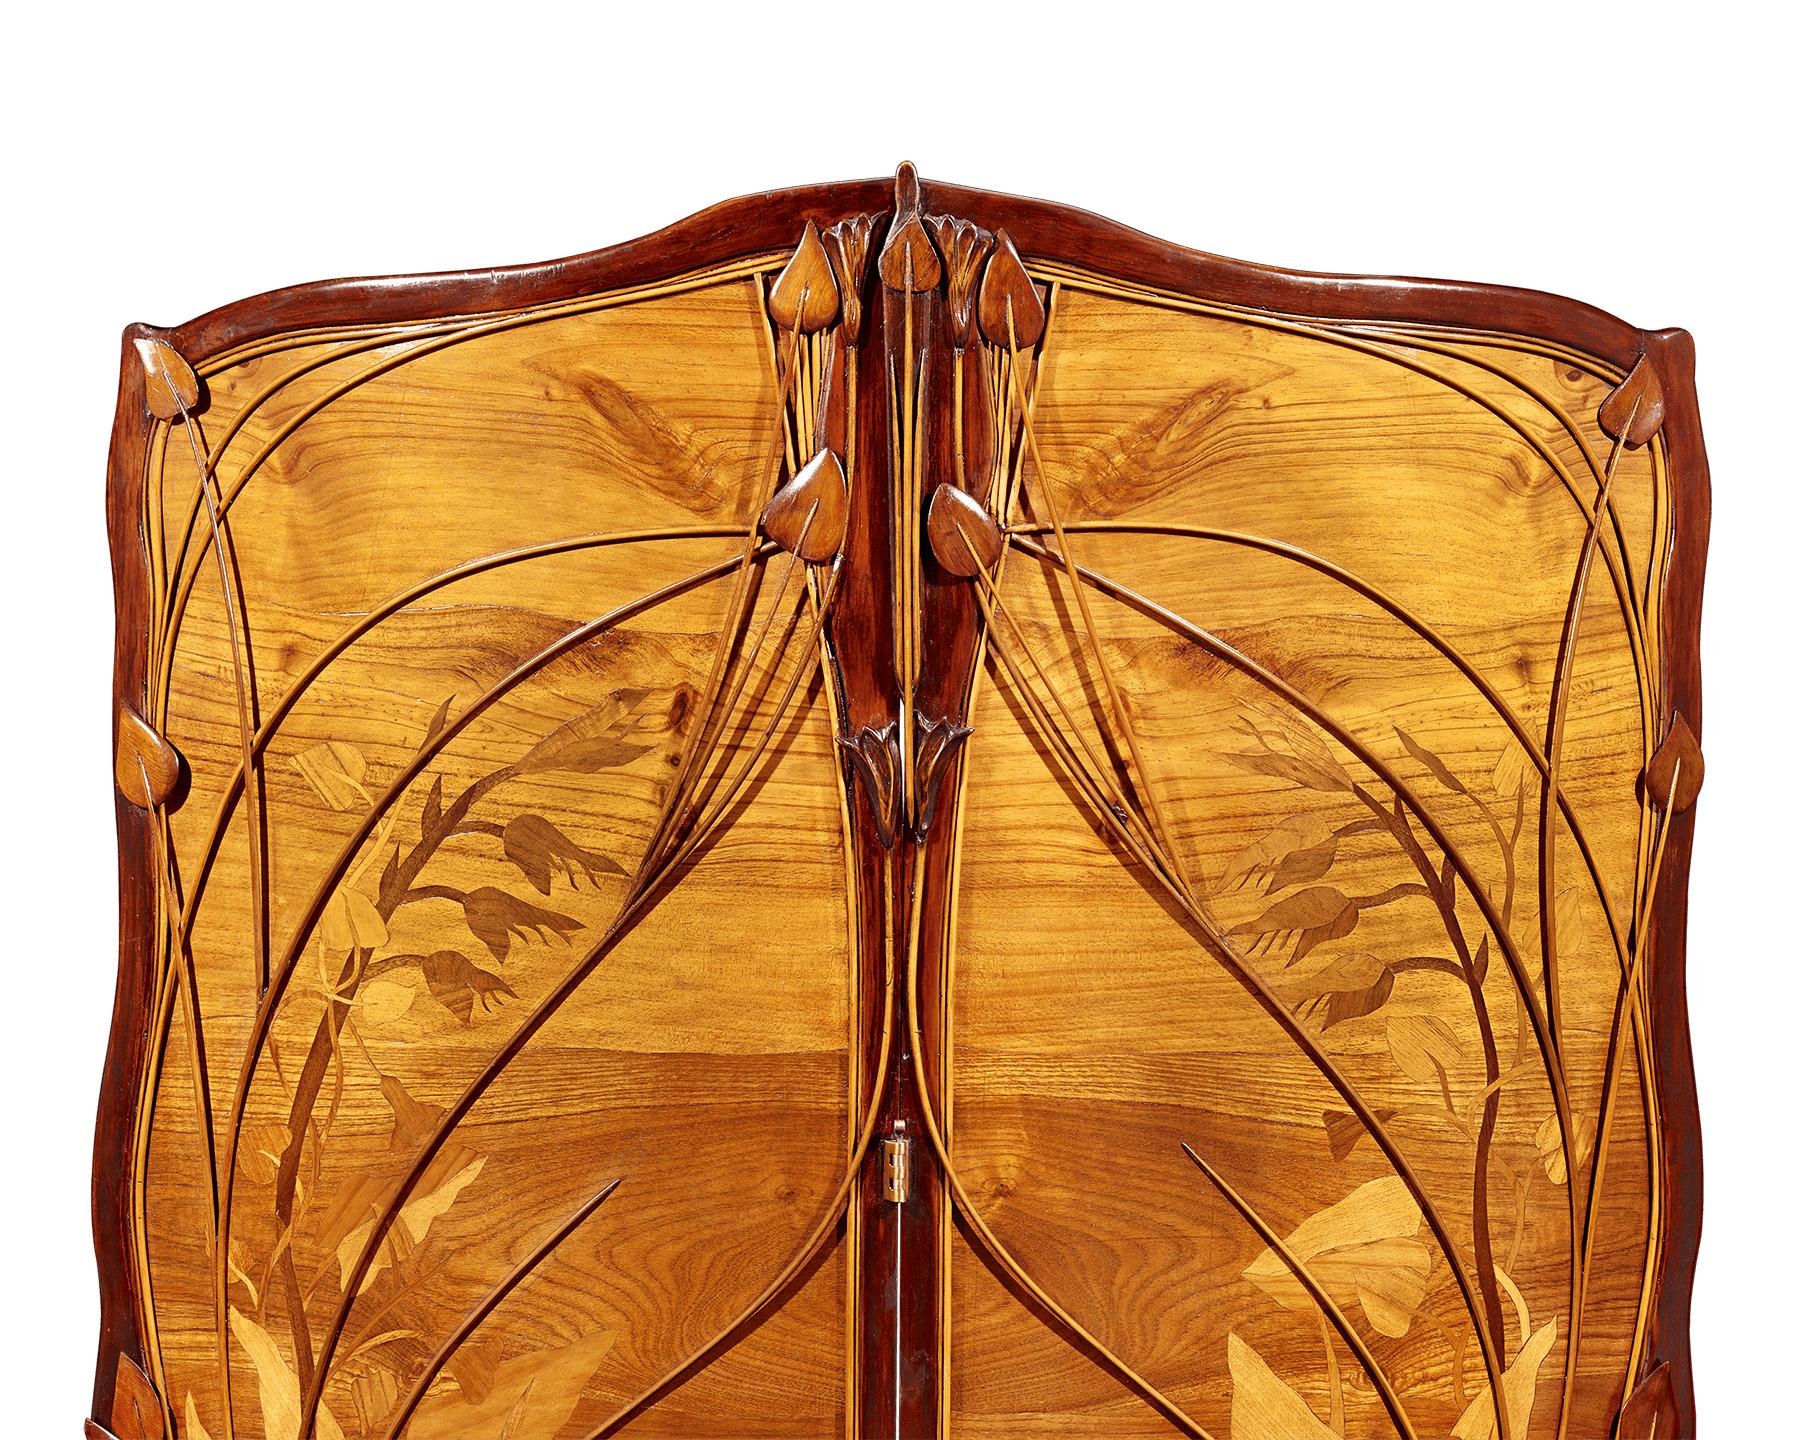 This astounding Art Nouveau room screen is a masterpiece of sinuous aesthetics. Comprising two large panels, the screen is covered in majestic marquetry depicting aquatic flora crafted woods of varying shades framed by applied foliage to tremendous